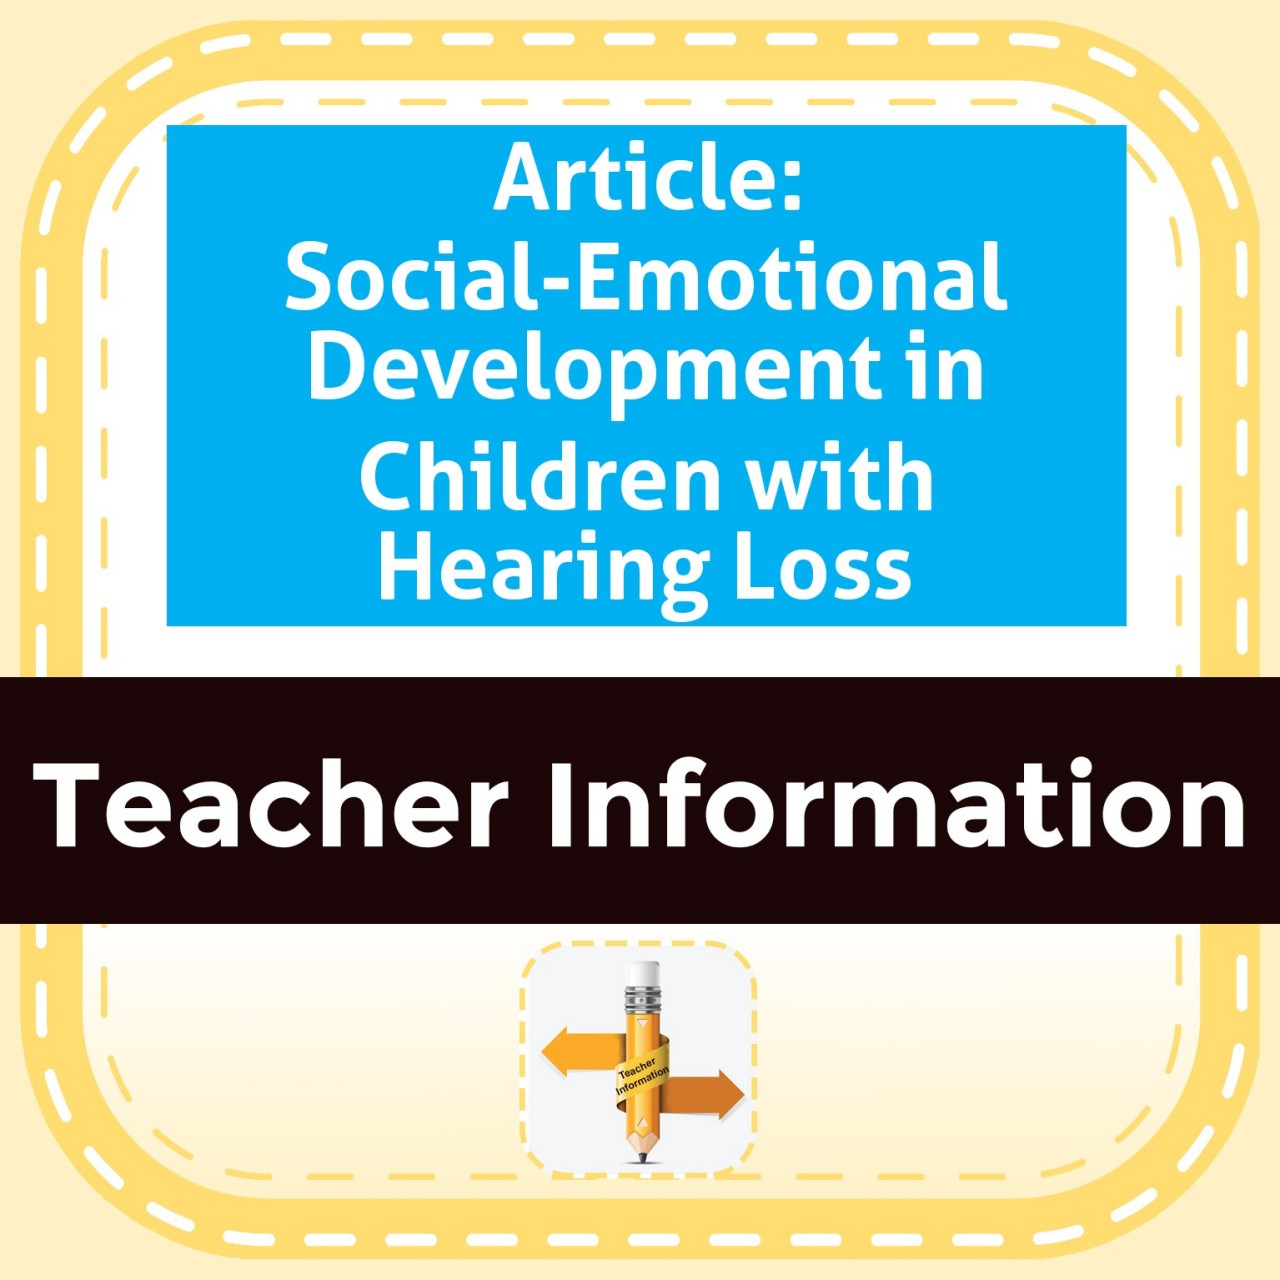 Article: Social-Emotional Development in Children with Hearing Loss